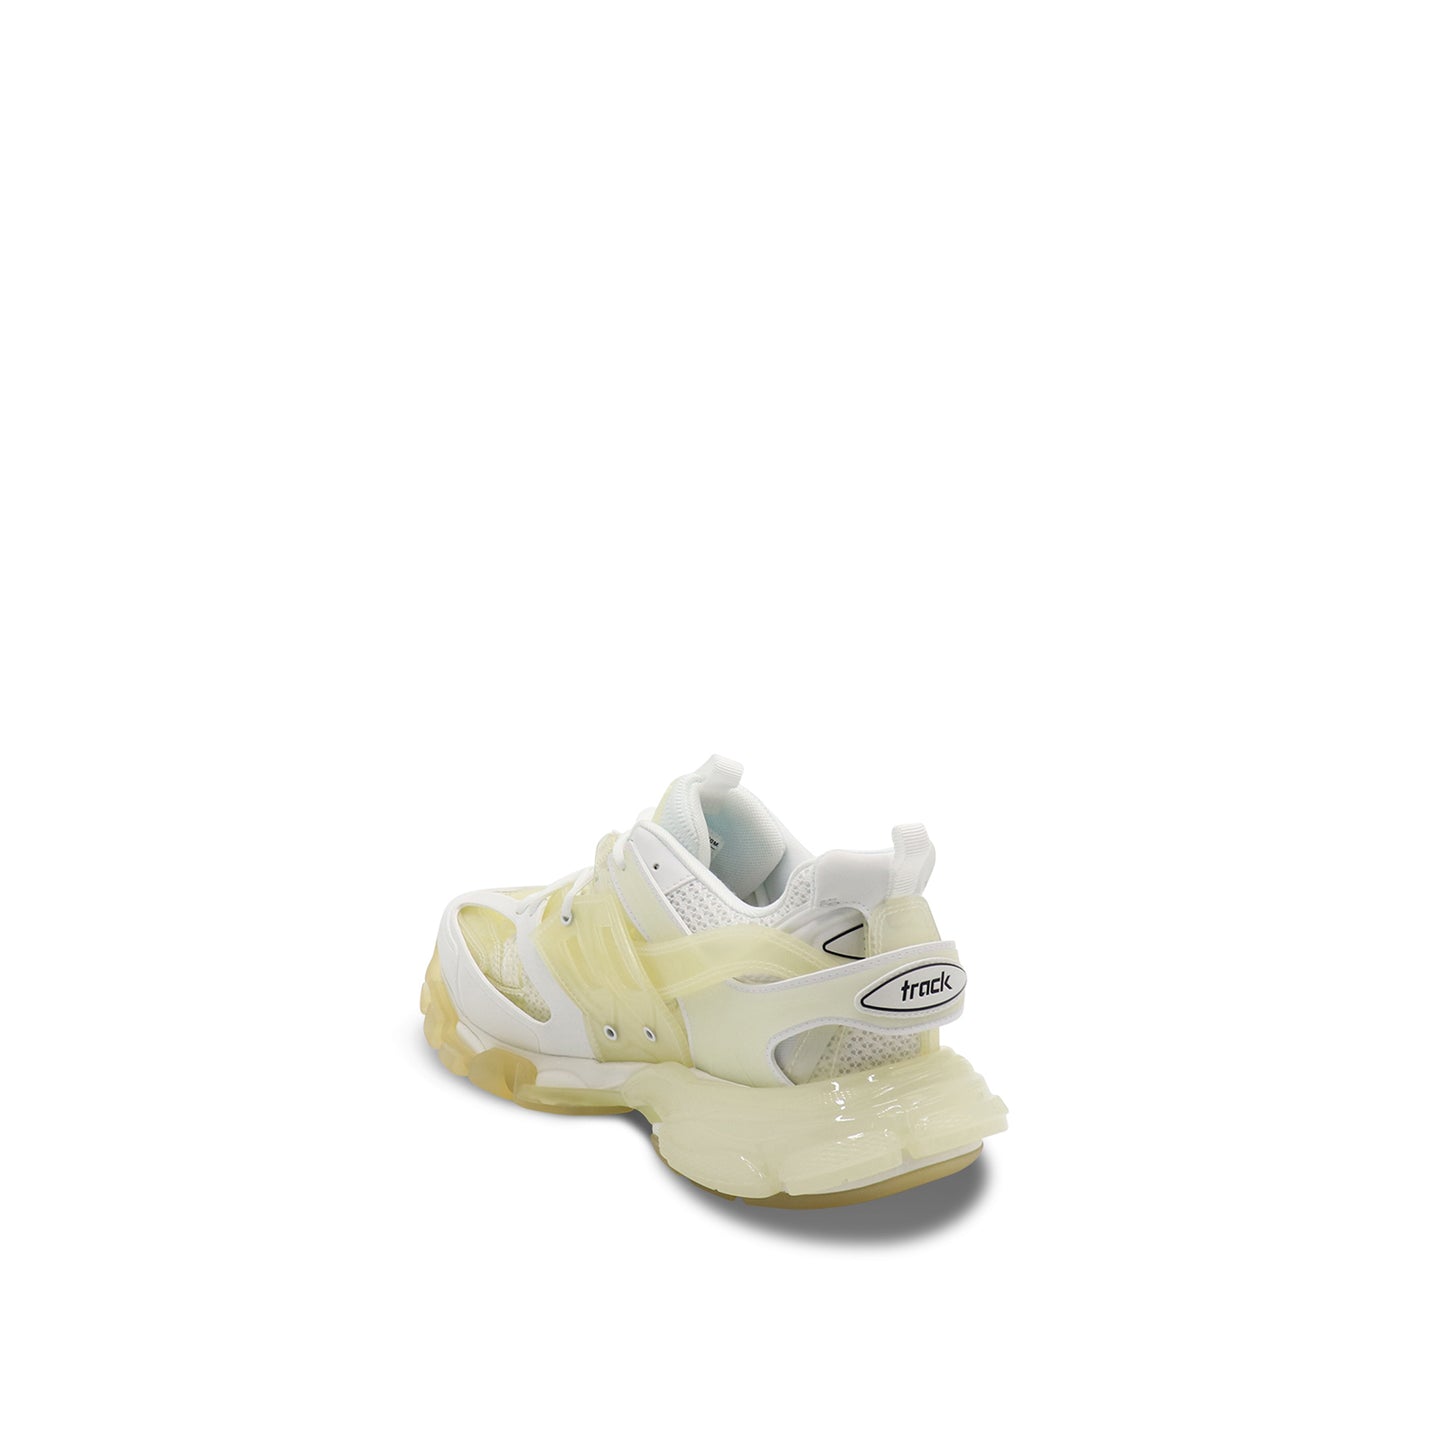 Track Clear Sole Sneaker in White/Trans